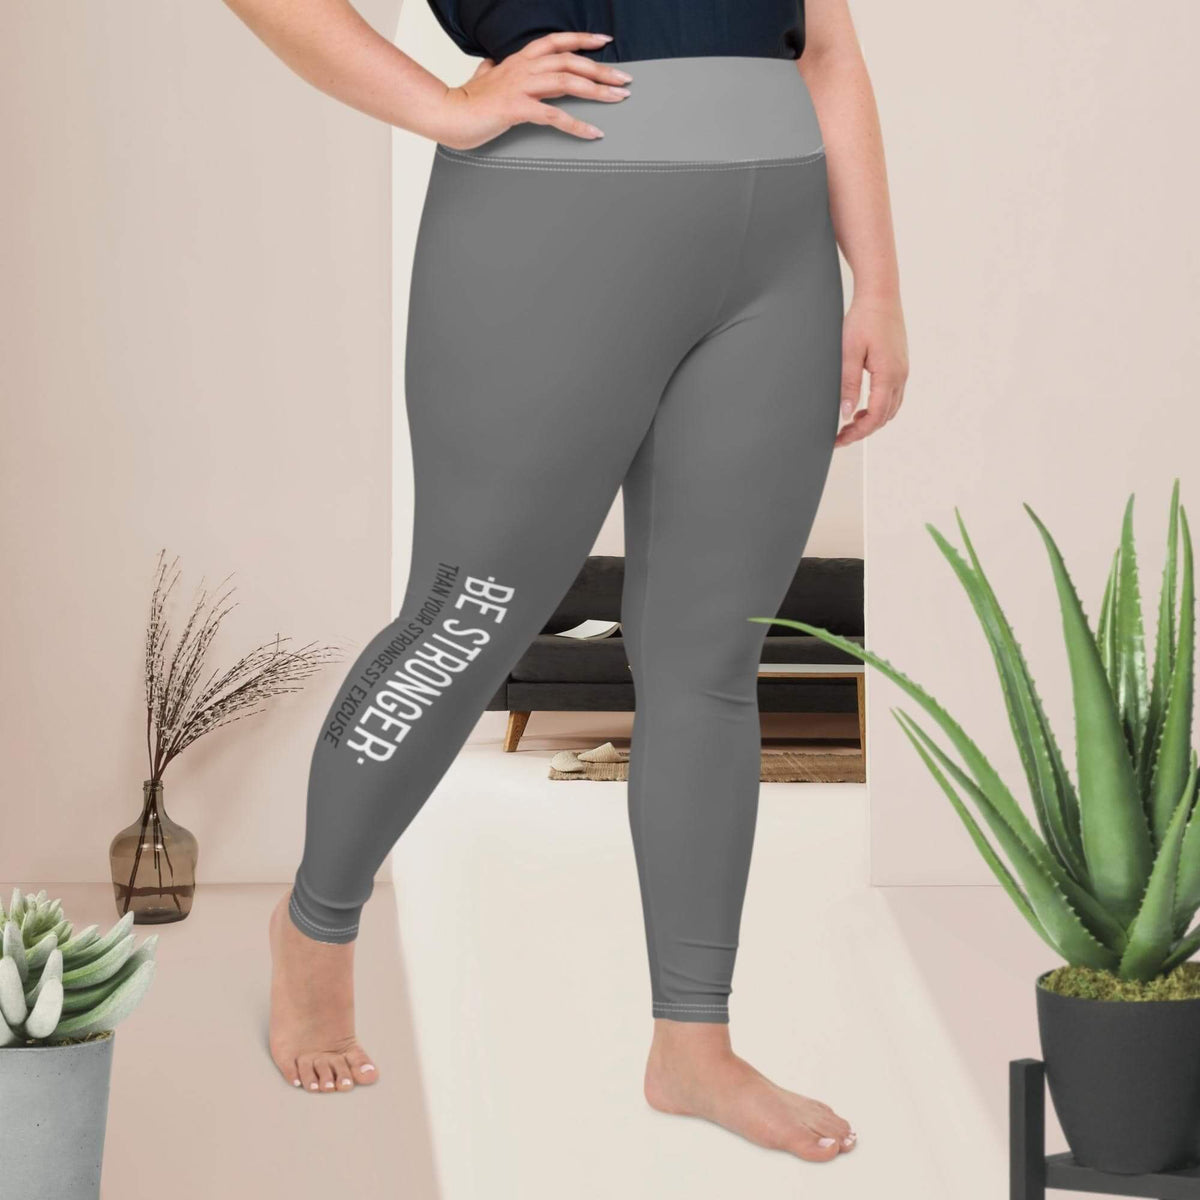 Women&#39;s Plus Size Leggings | Casual High Waisted Leggings - Revive Wear     Women&#39;s Plus Size Leggings. The best workout leggings for women. Get a workout wardrobe that lasts and looks great. Shop our collection today.